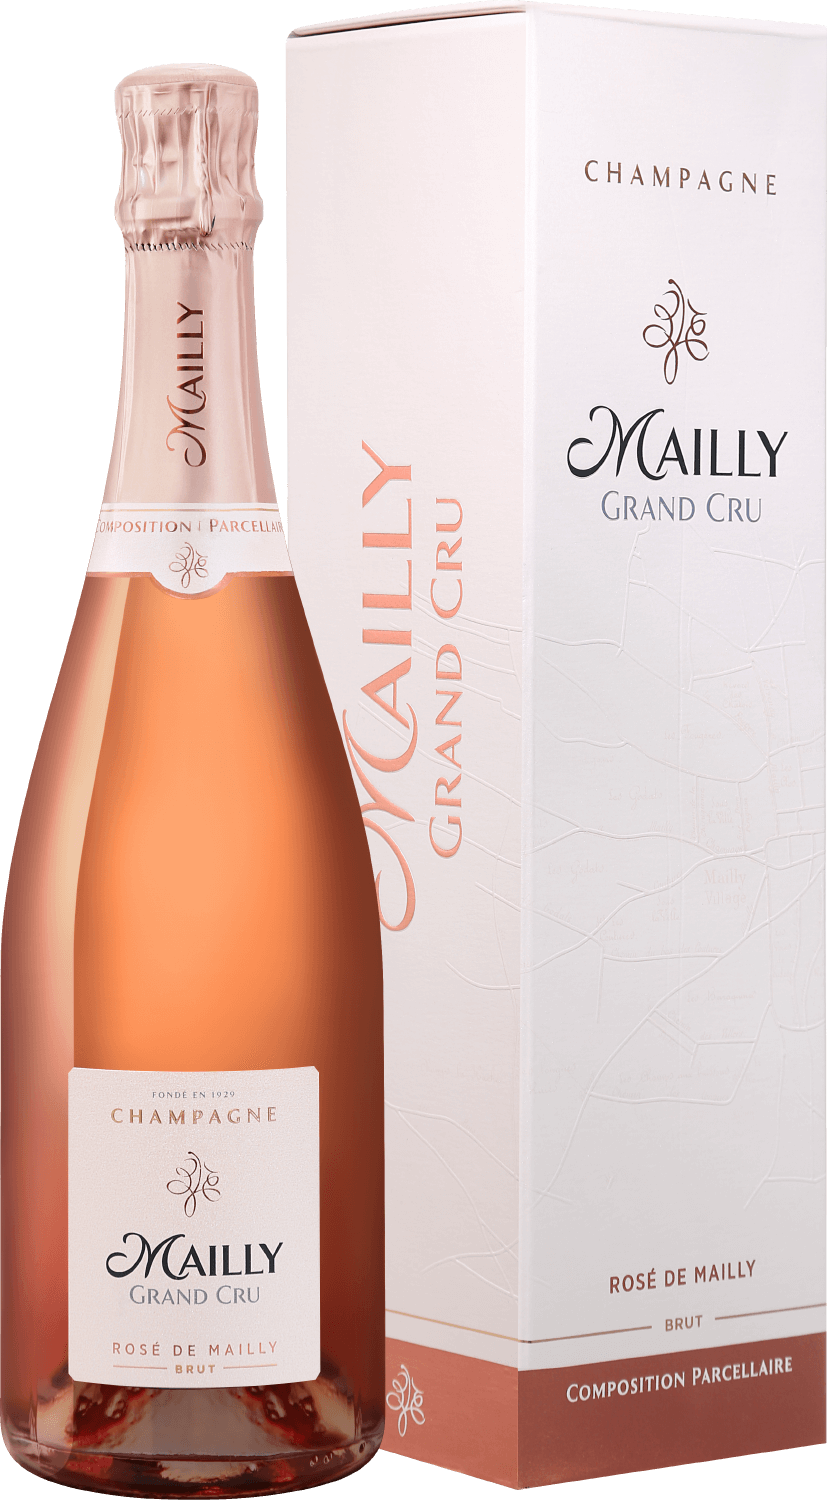 Mailly Grand Cru Rose de Mailly Brut Champagne AOC (gift box) mailly grand cru rose de mailly brut champagne aoc